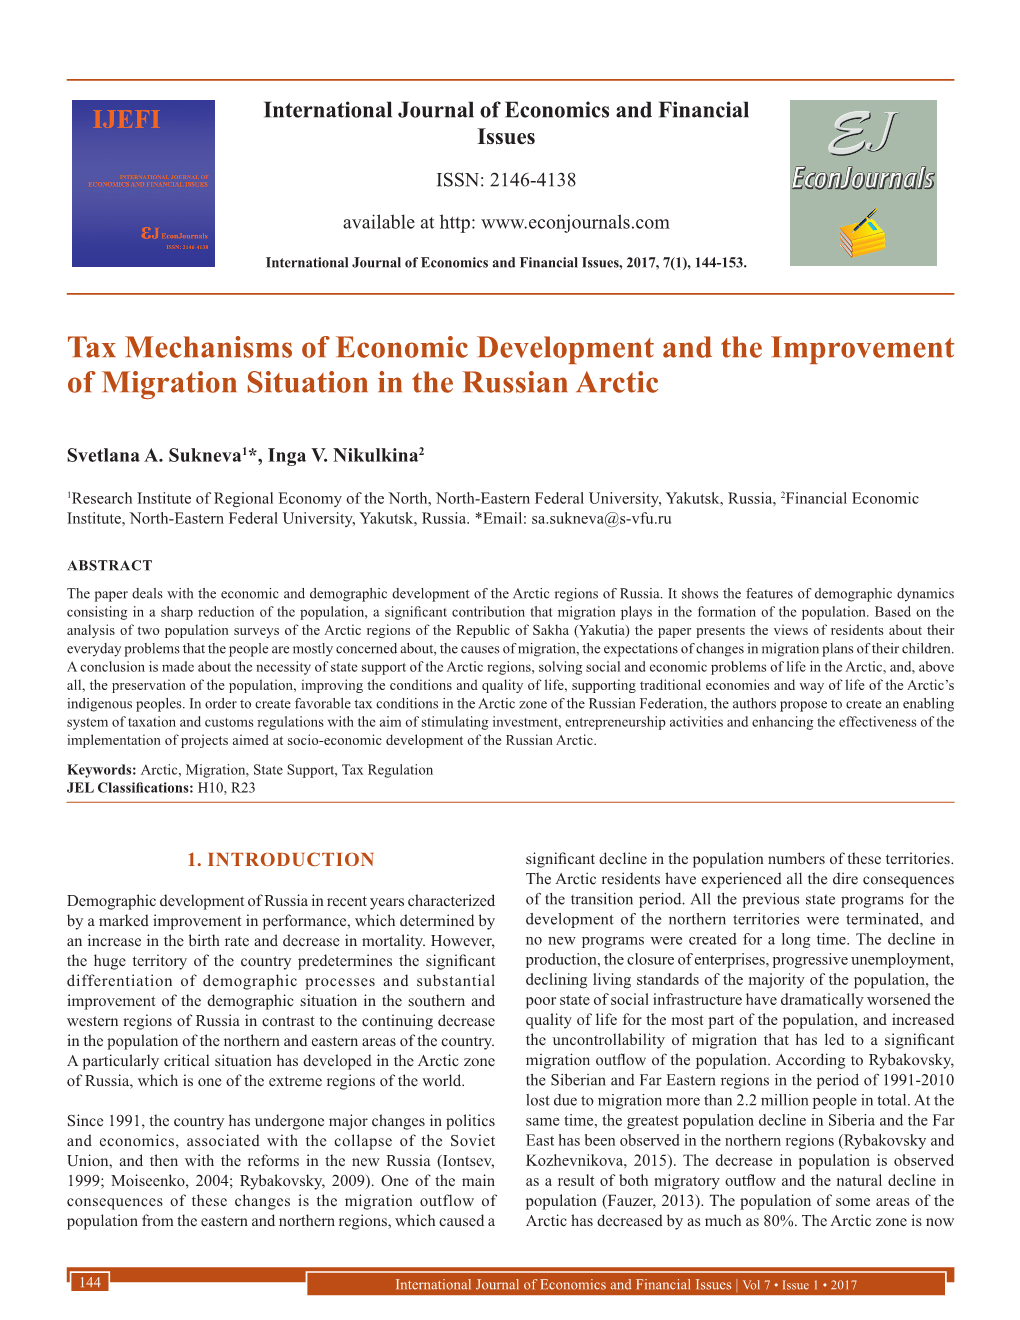 Tax Mechanisms of Economic Development and the Improvement of Migration Situation in the Russian Arctic